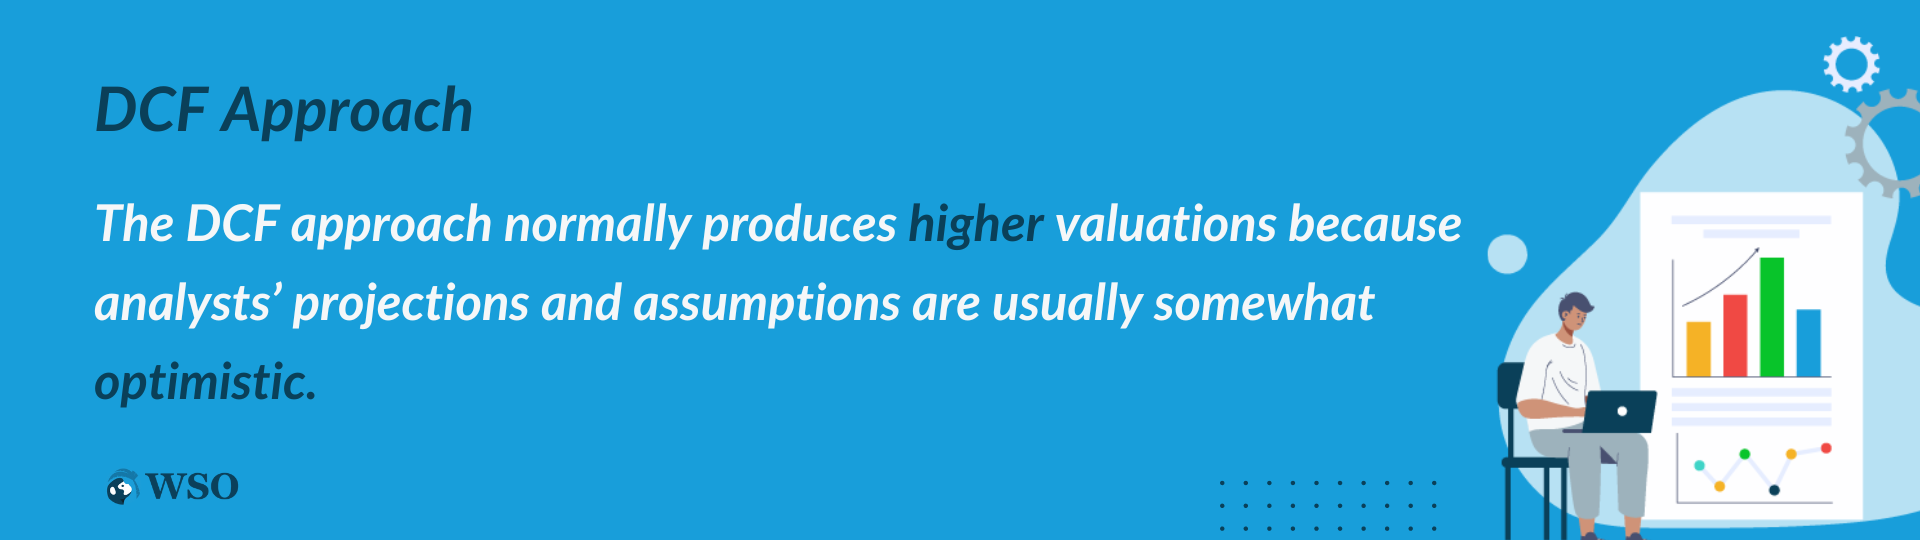 multiple valuations of a single company